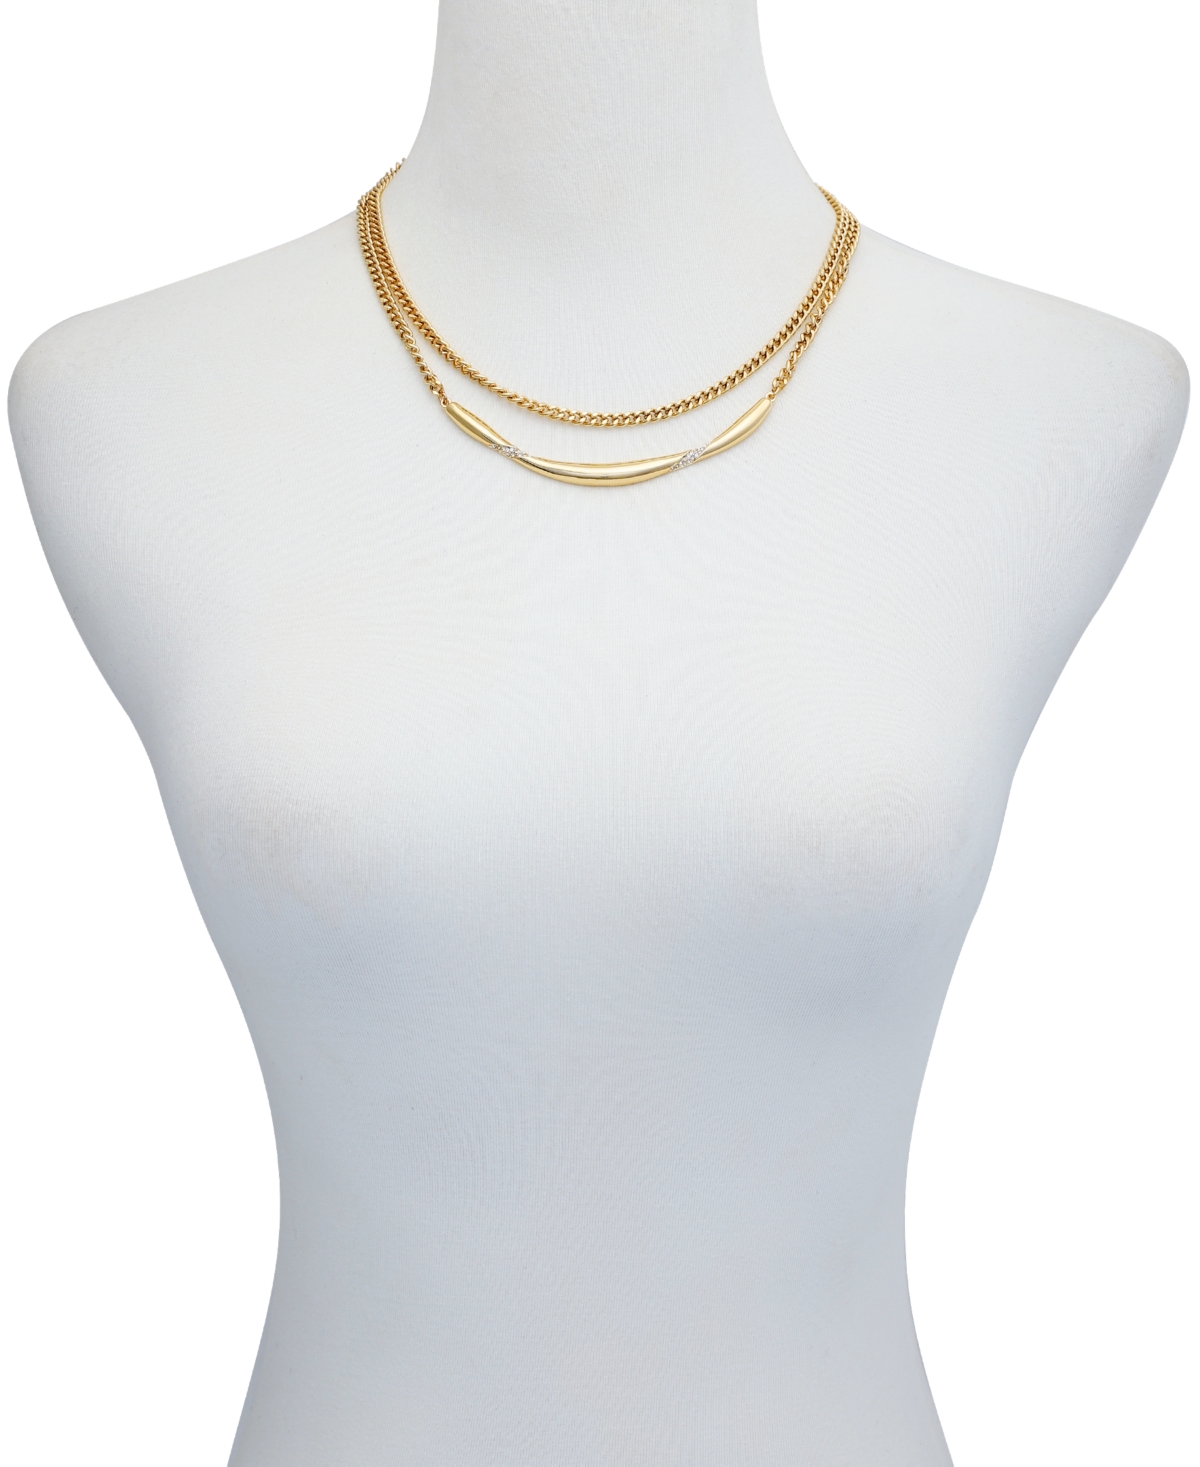 Shop Vince Camuto Gold-tone Layered Curb Chain Necklace, 18" + 2" Extender